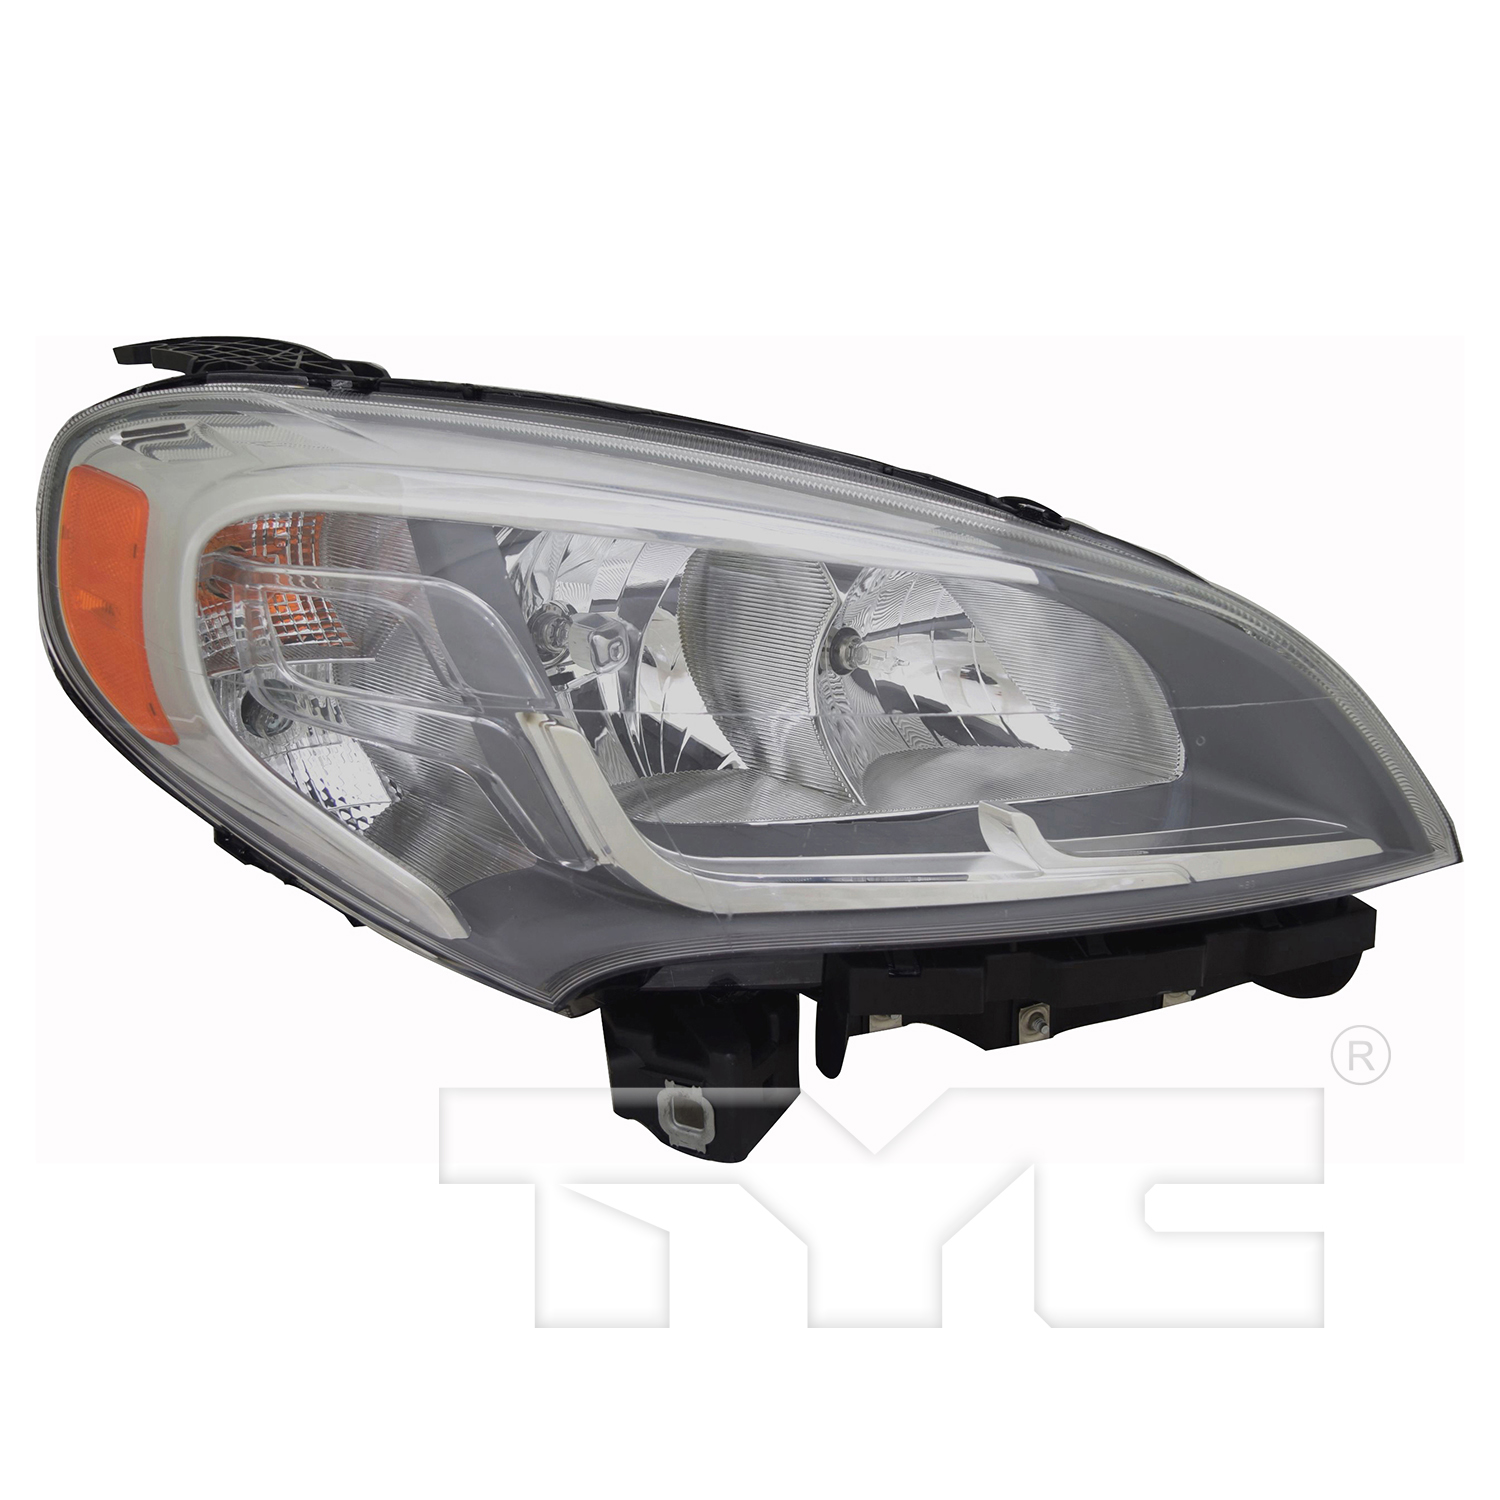 Aftermarket HEADLIGHTS for RAM - PROMASTER CITY, PROMASTER CITY,15-22,RT Headlamp assy composite